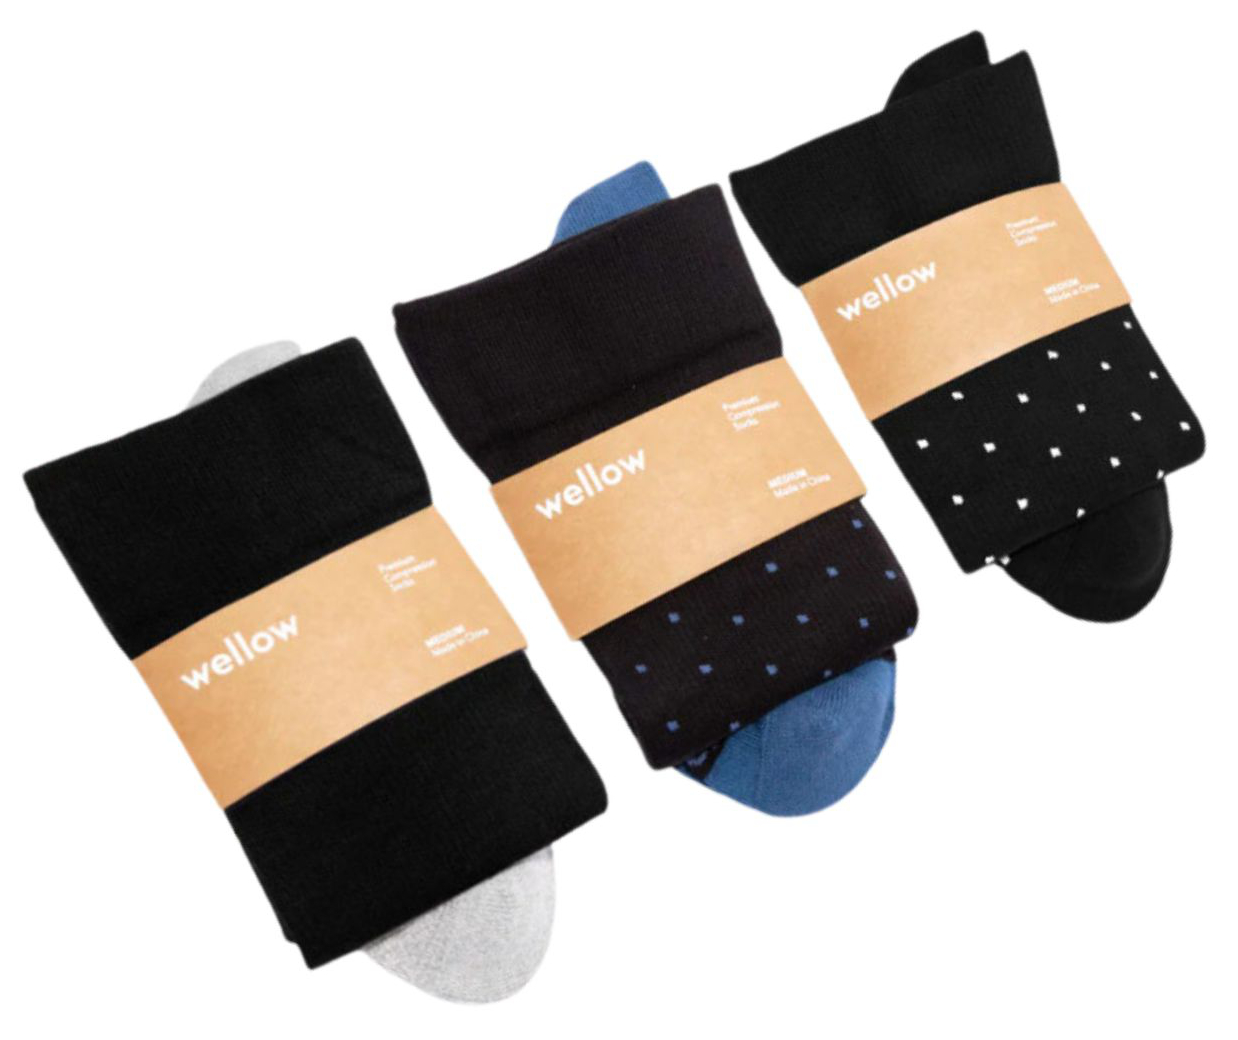 Set of 3 compression socks for father's day